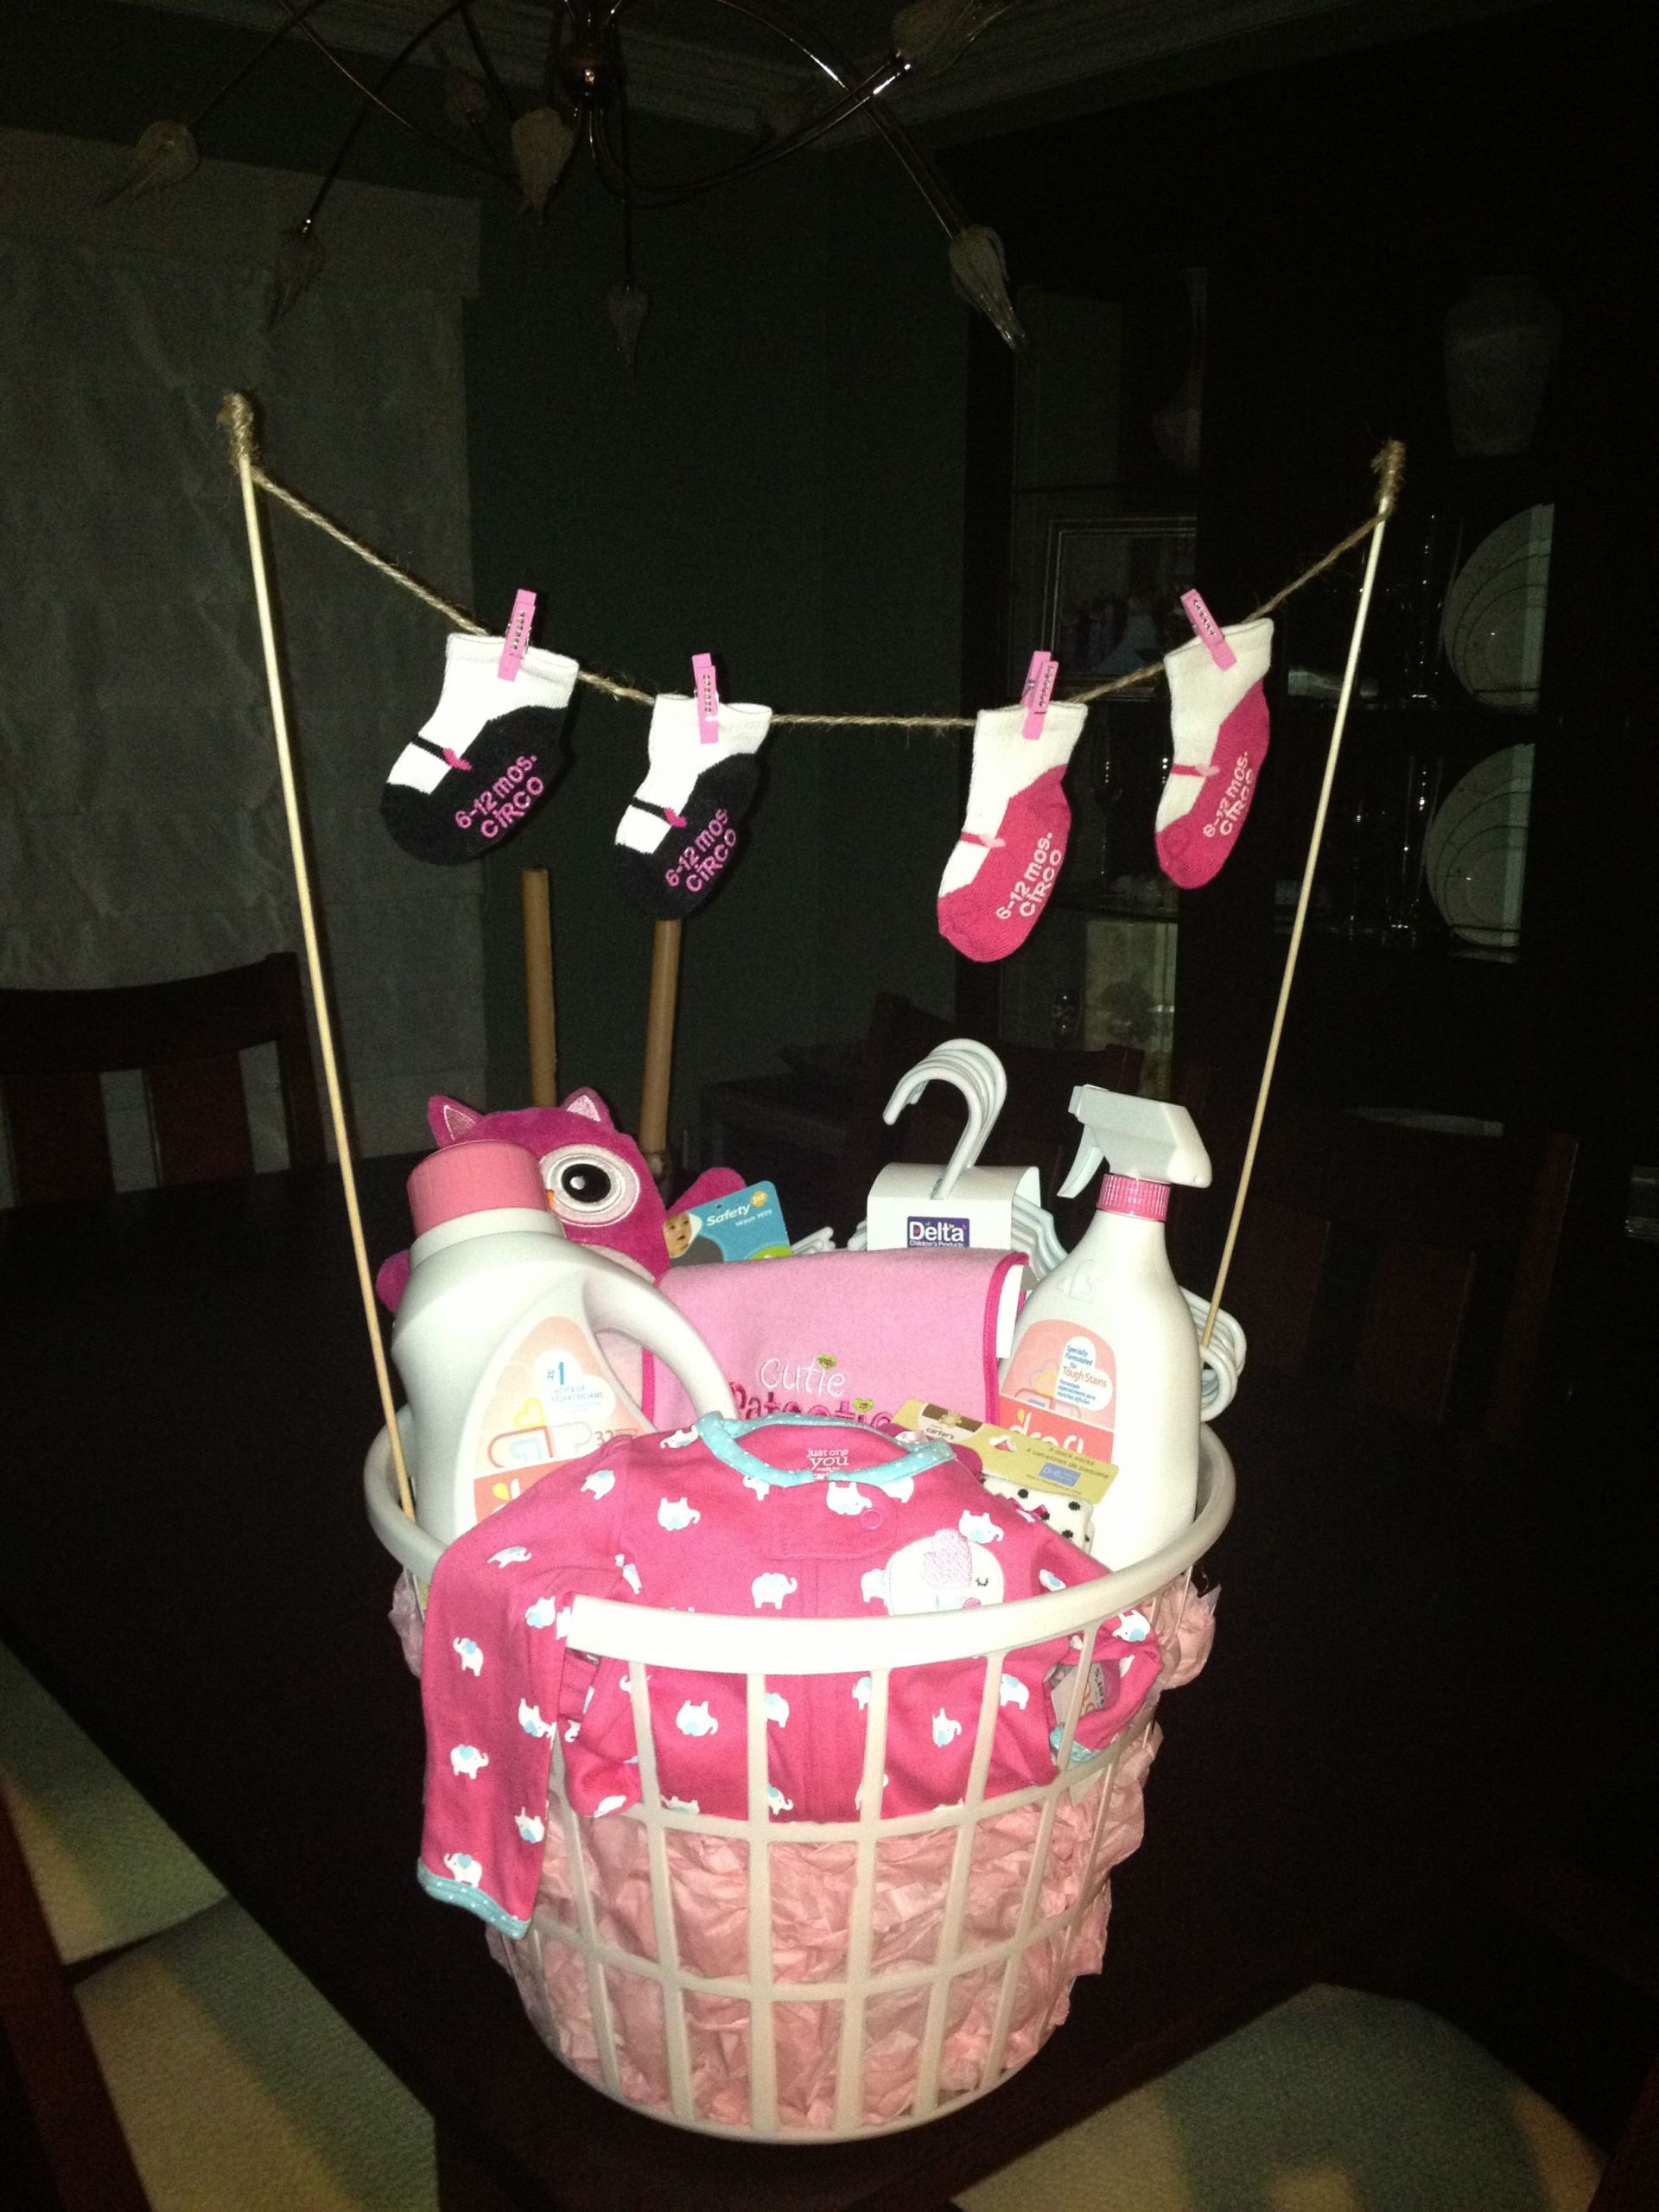 Newborn Baby Gift Baskets Ideas
 Laundry basket baby shower t Baby Gifts